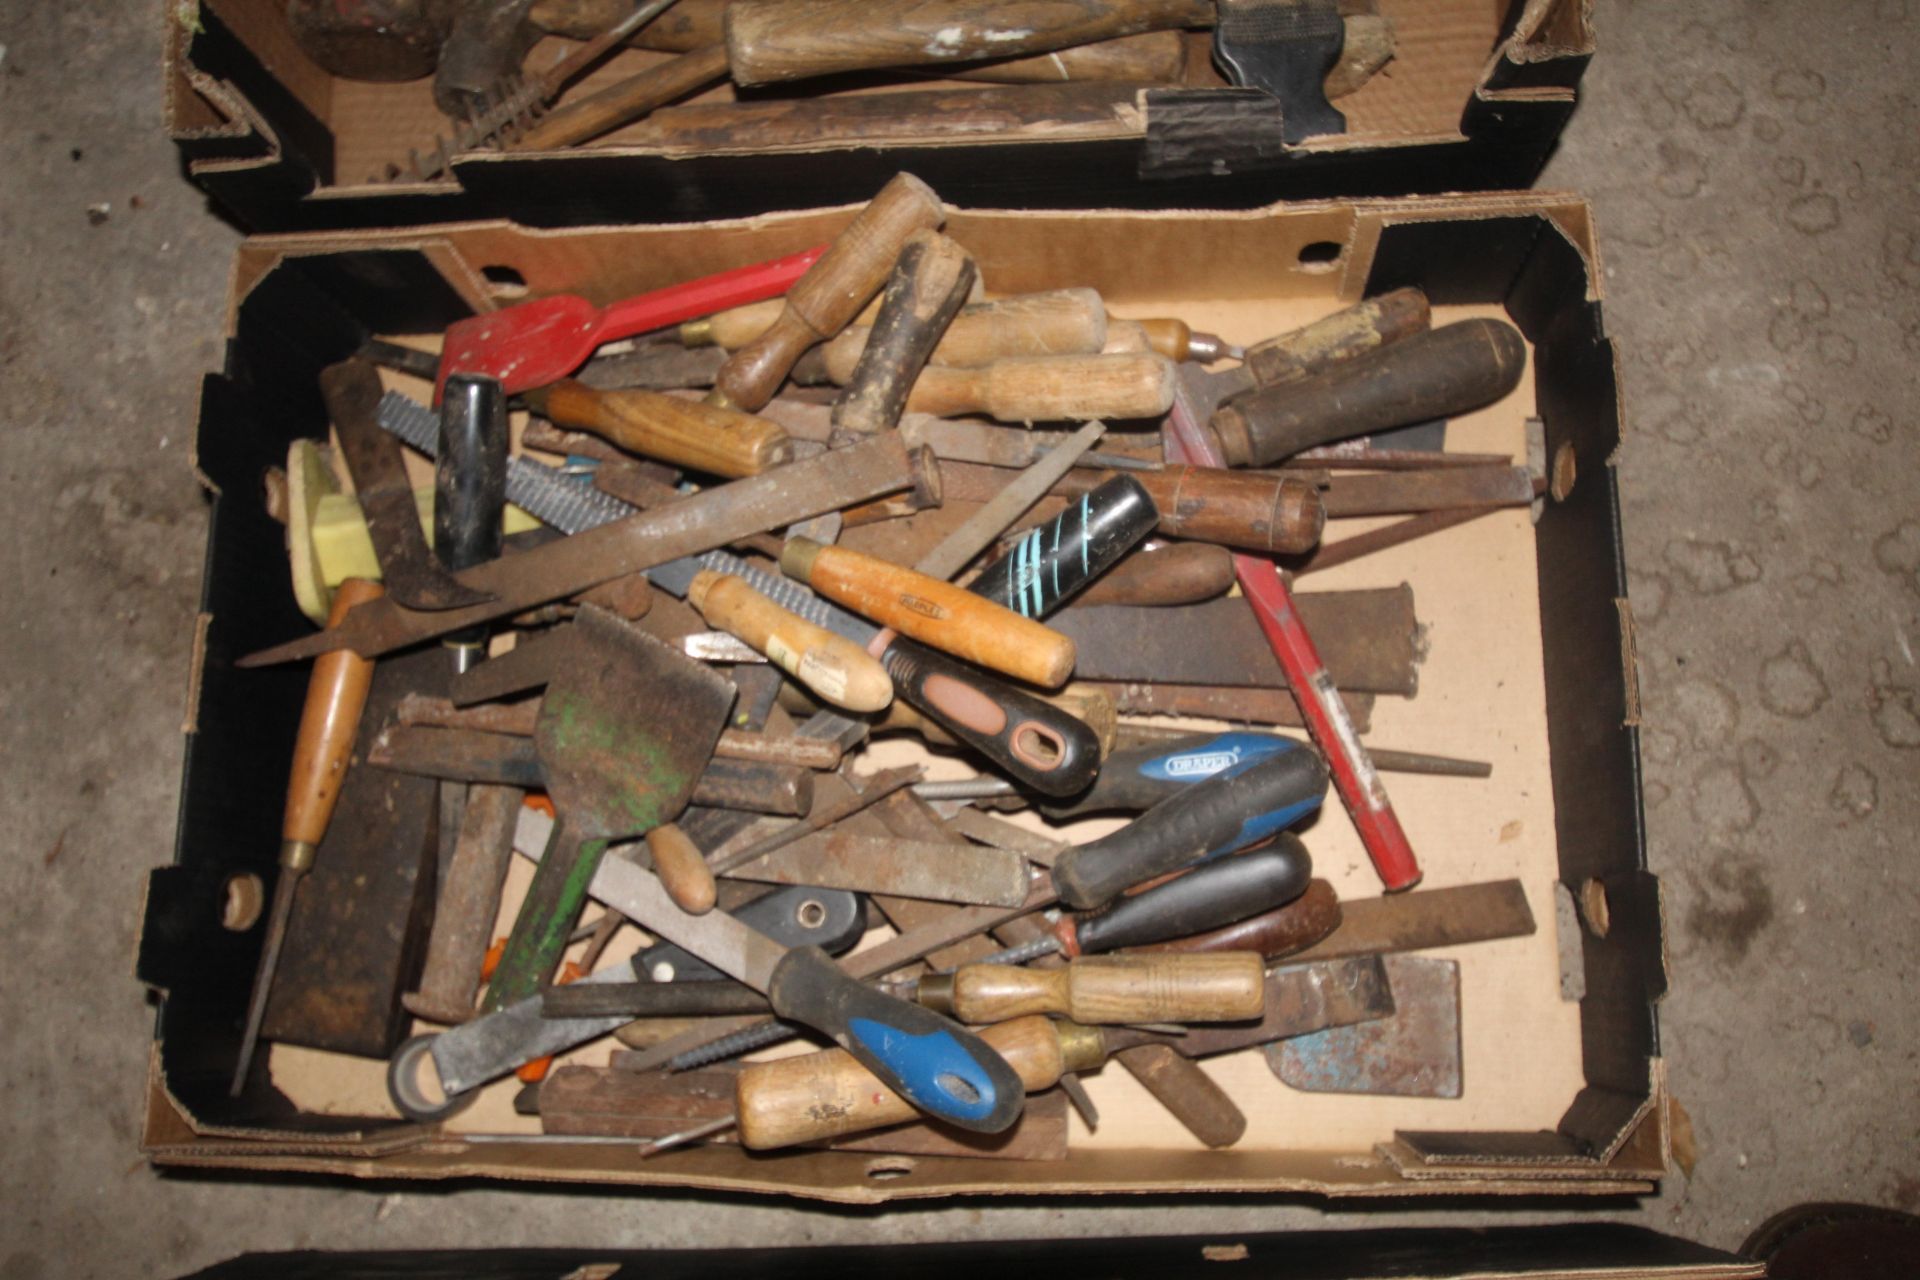 Tray of various chisels, splitting wedges etc.